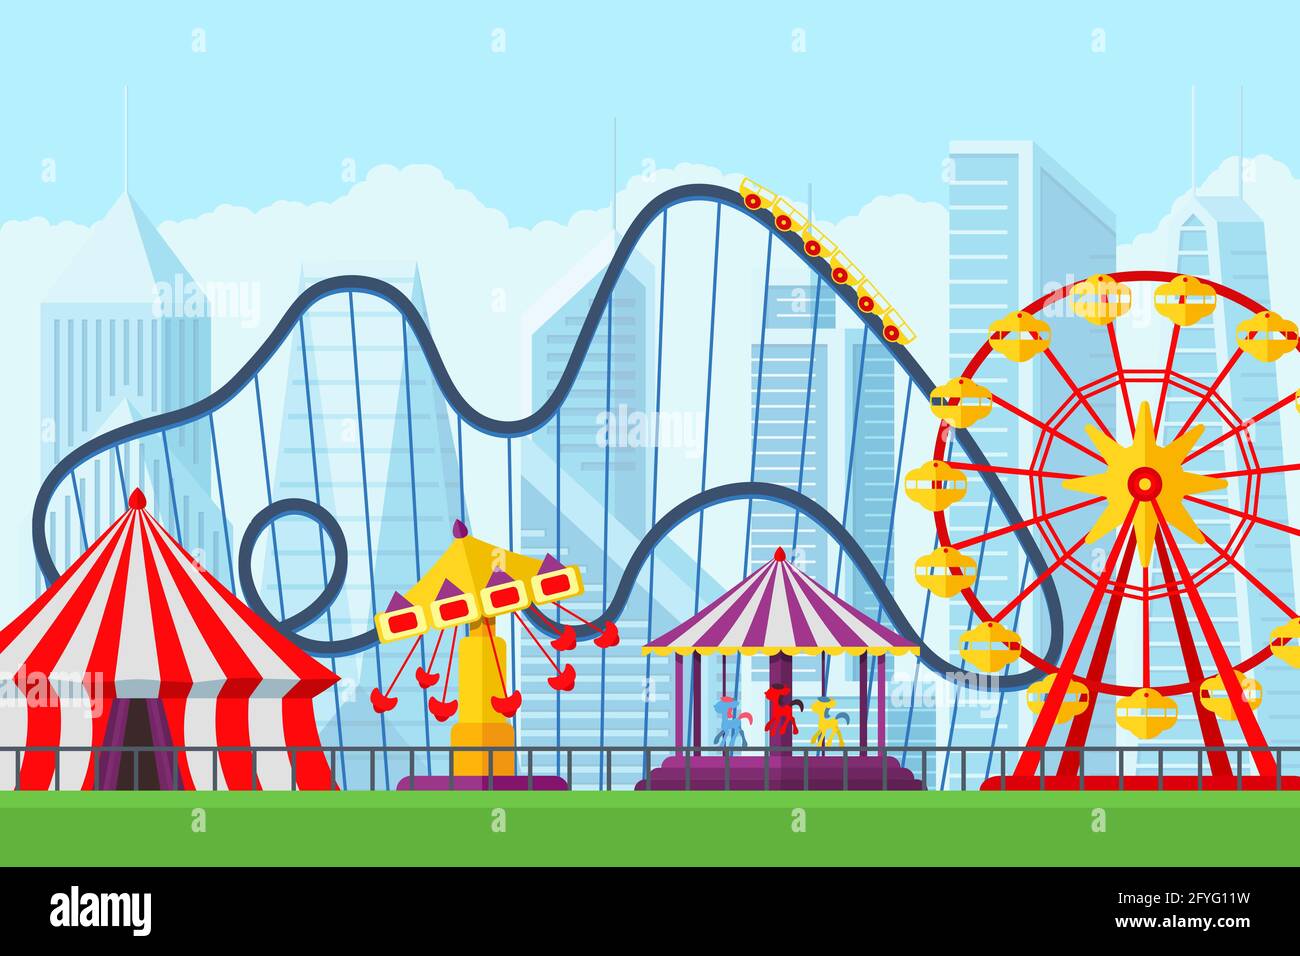 Amusement park with circus carousels roller coaster and attractions entertainment in city. Fun fair and carnival theme landscape. Ferris wheel and merry-go-round festival vector illustration banner Stock Vector